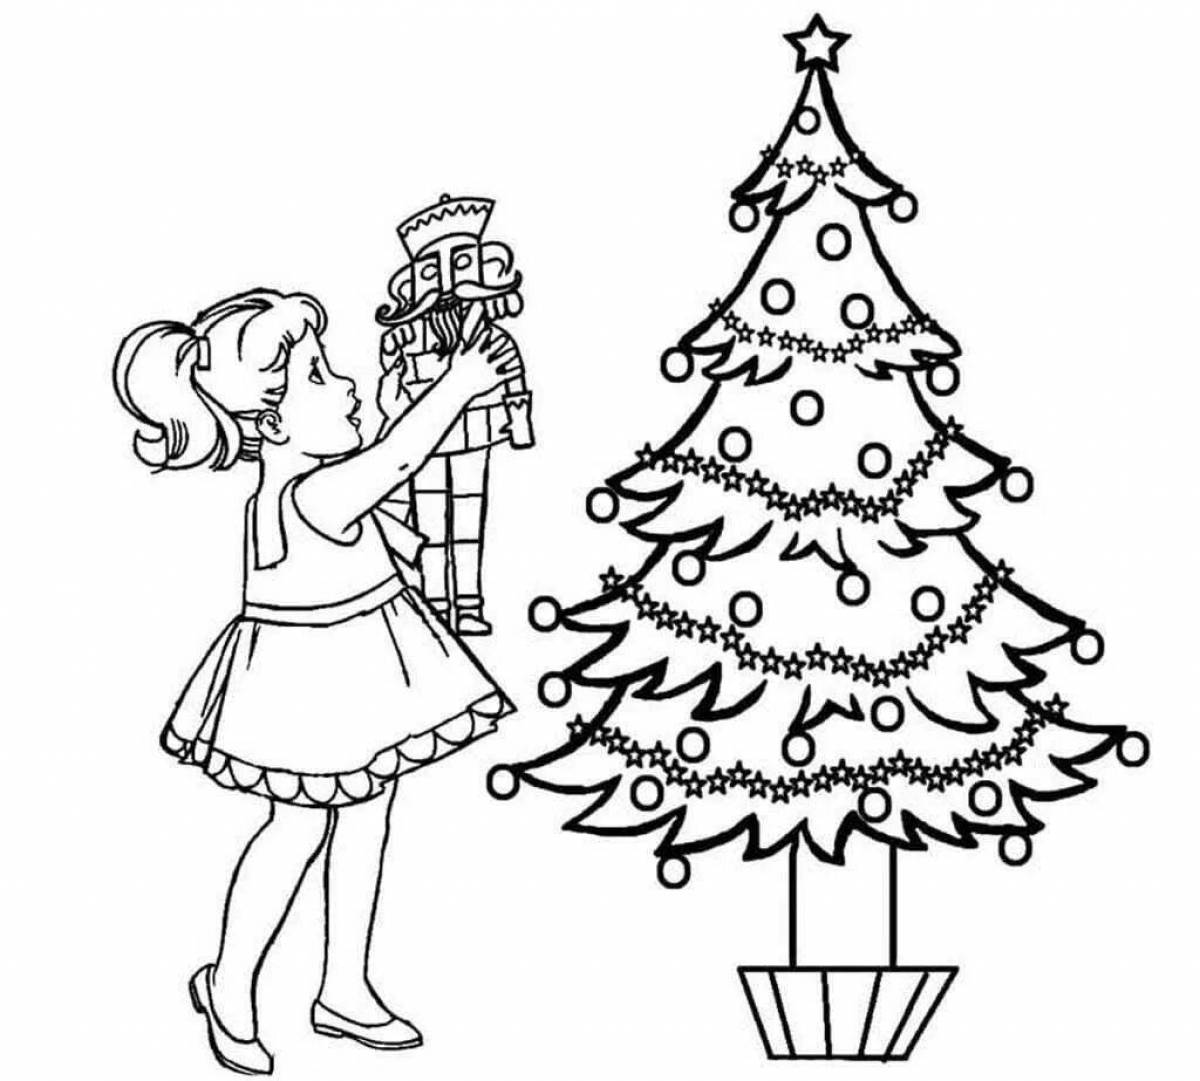 Coloring page a magnificent round dance around a tree